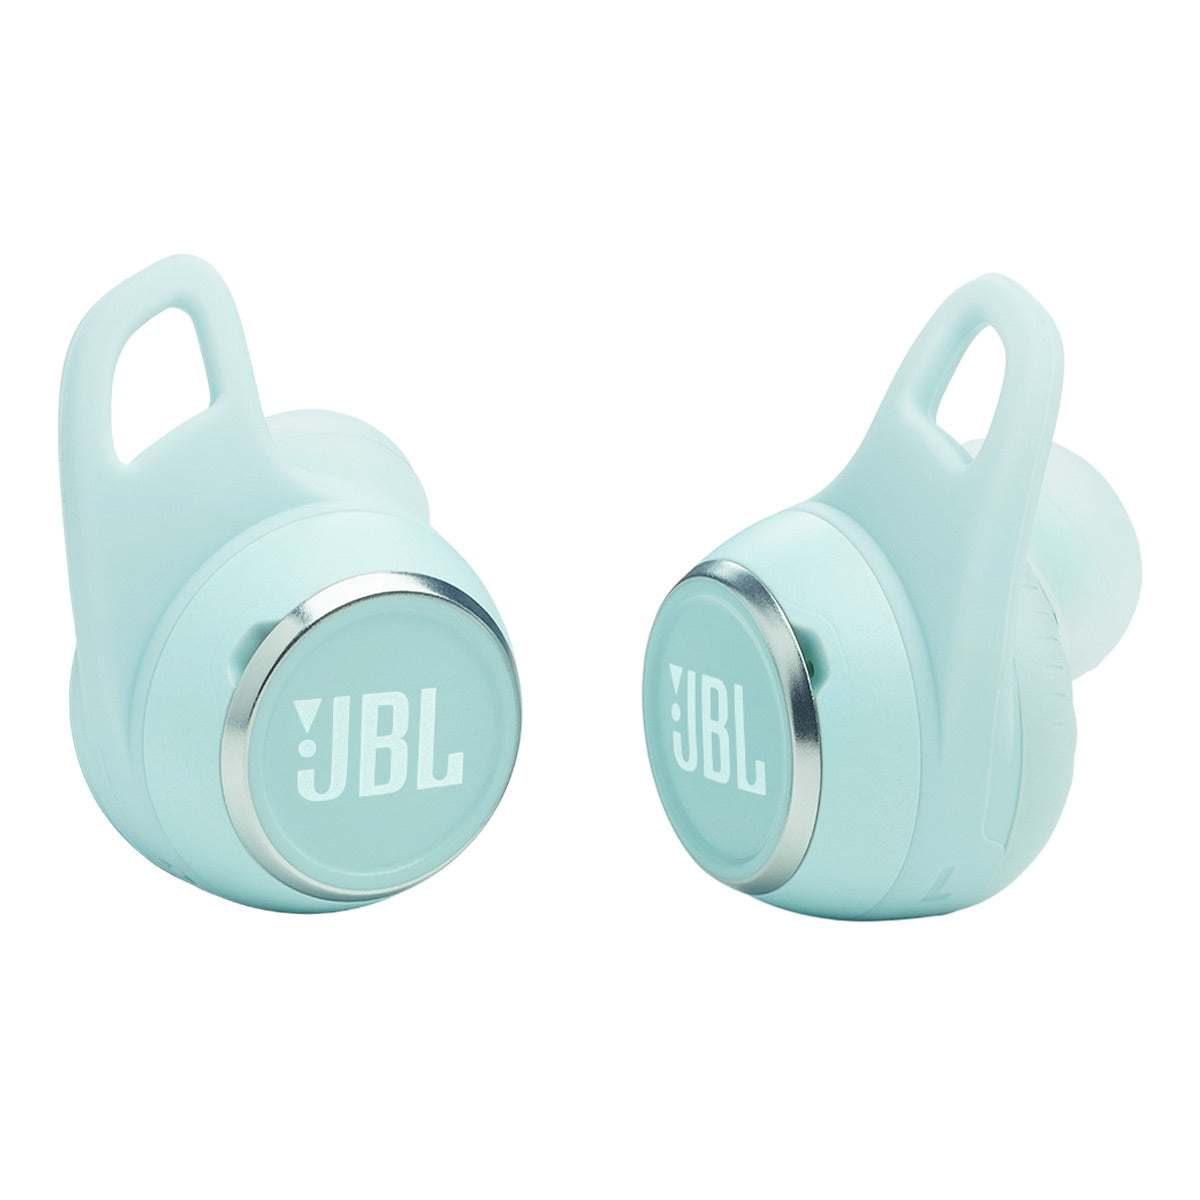 JBL Reflect Aero True Wireless Earbuds with Adaptive Noise Cancelling (Mint)